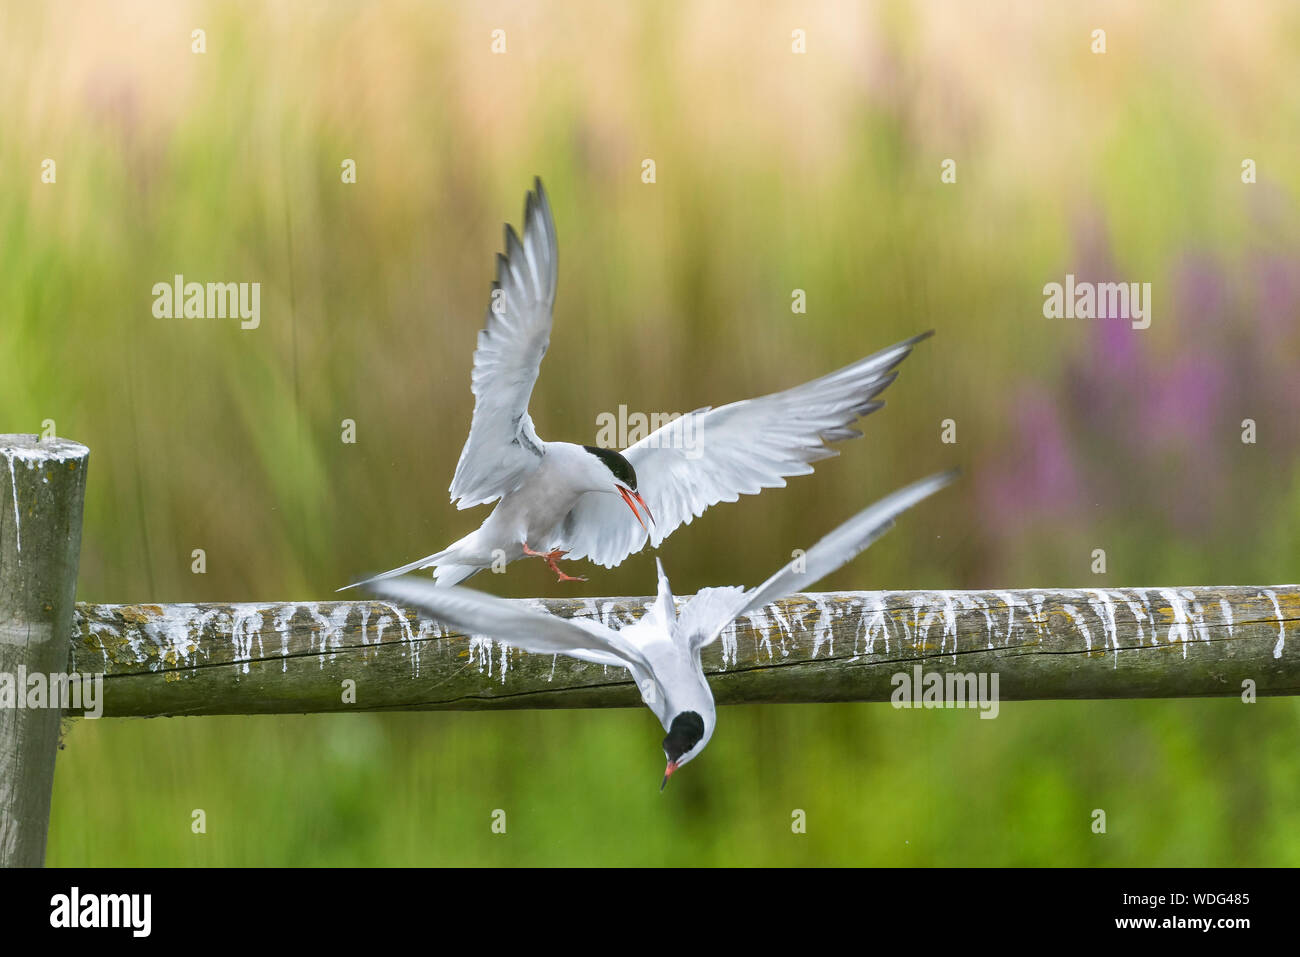 Common Terns, Sterna hirundo, at Greenwich Ecology park. Swooping over wooden perch. Stock Photo